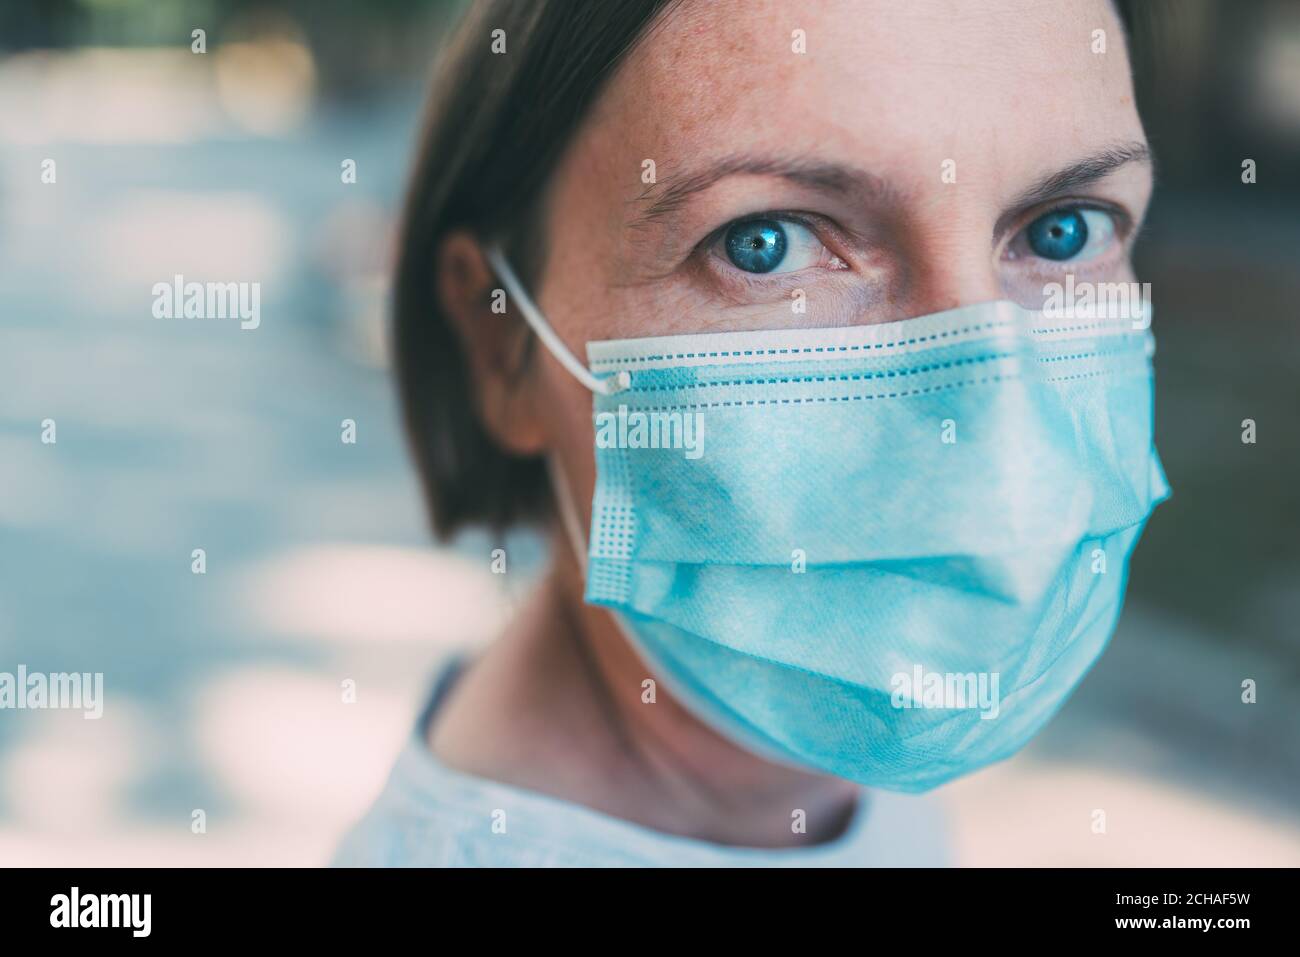 Everyday people with protective face mask during coronavirus pandemics, close up portrait with selective focus Stock Photo